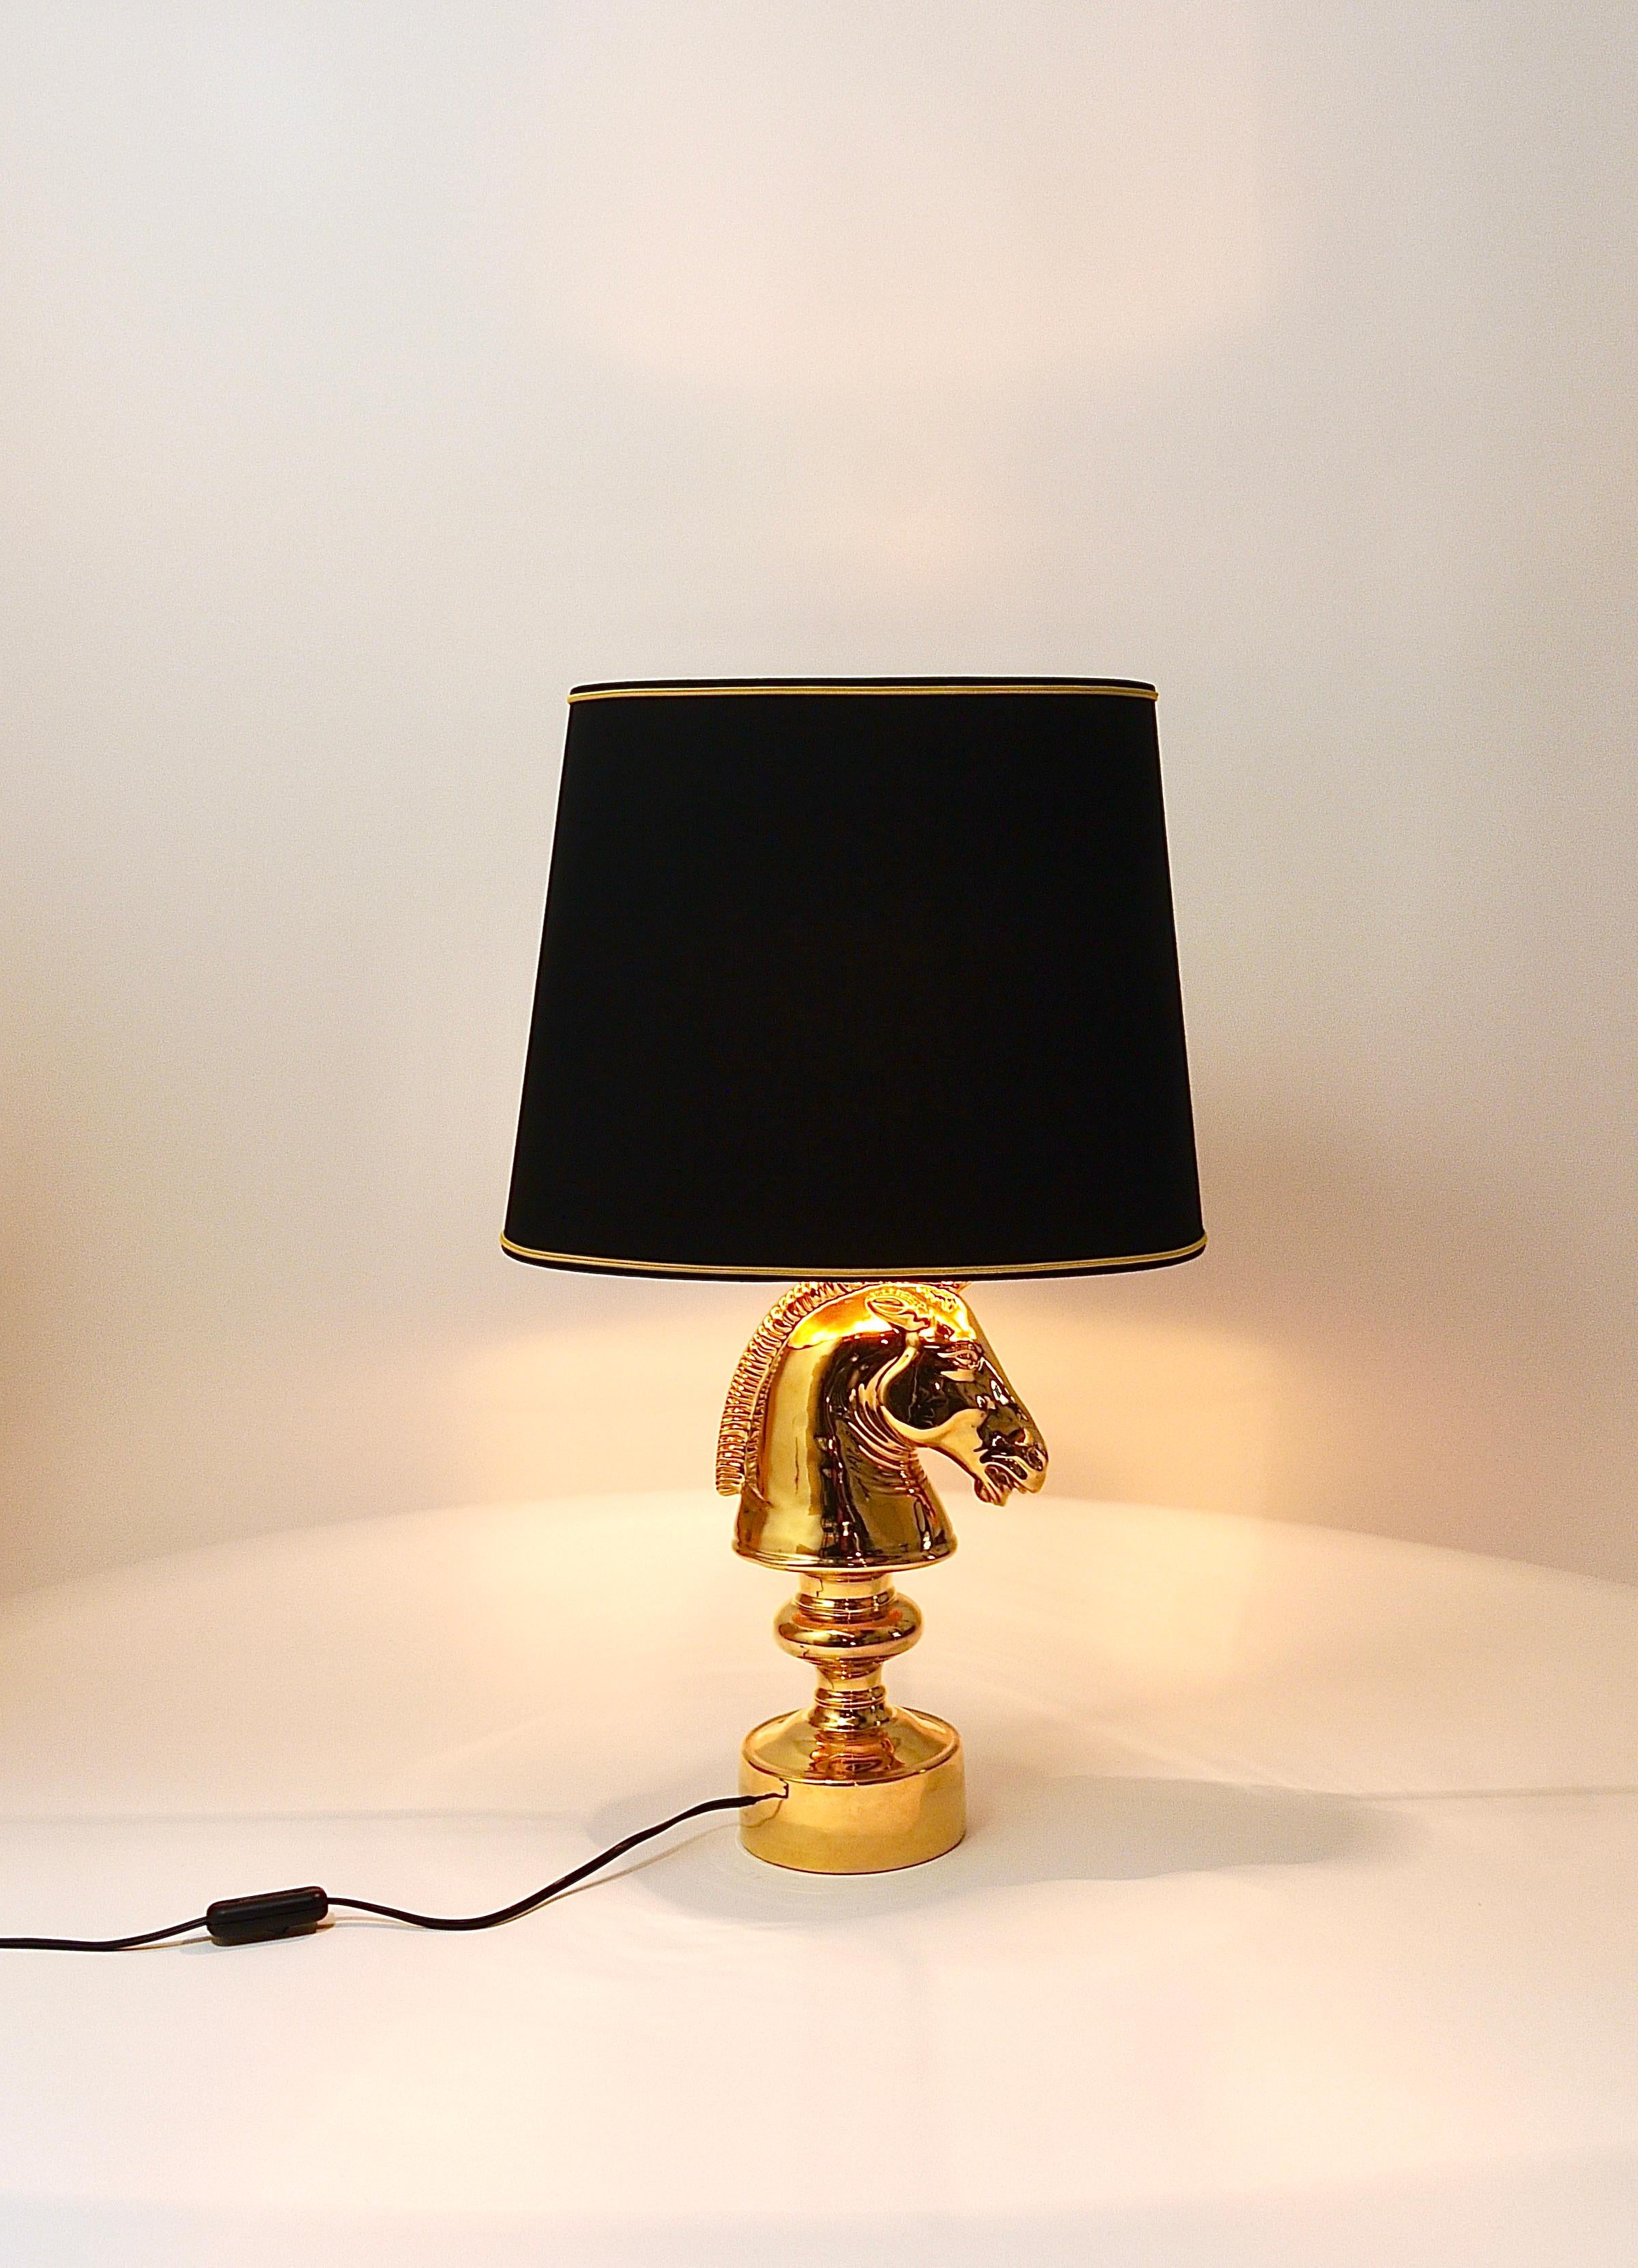 Golden Hollywood Regency Horse Sculpture Table or Side Lamp, Italy, 1970s For Sale 8